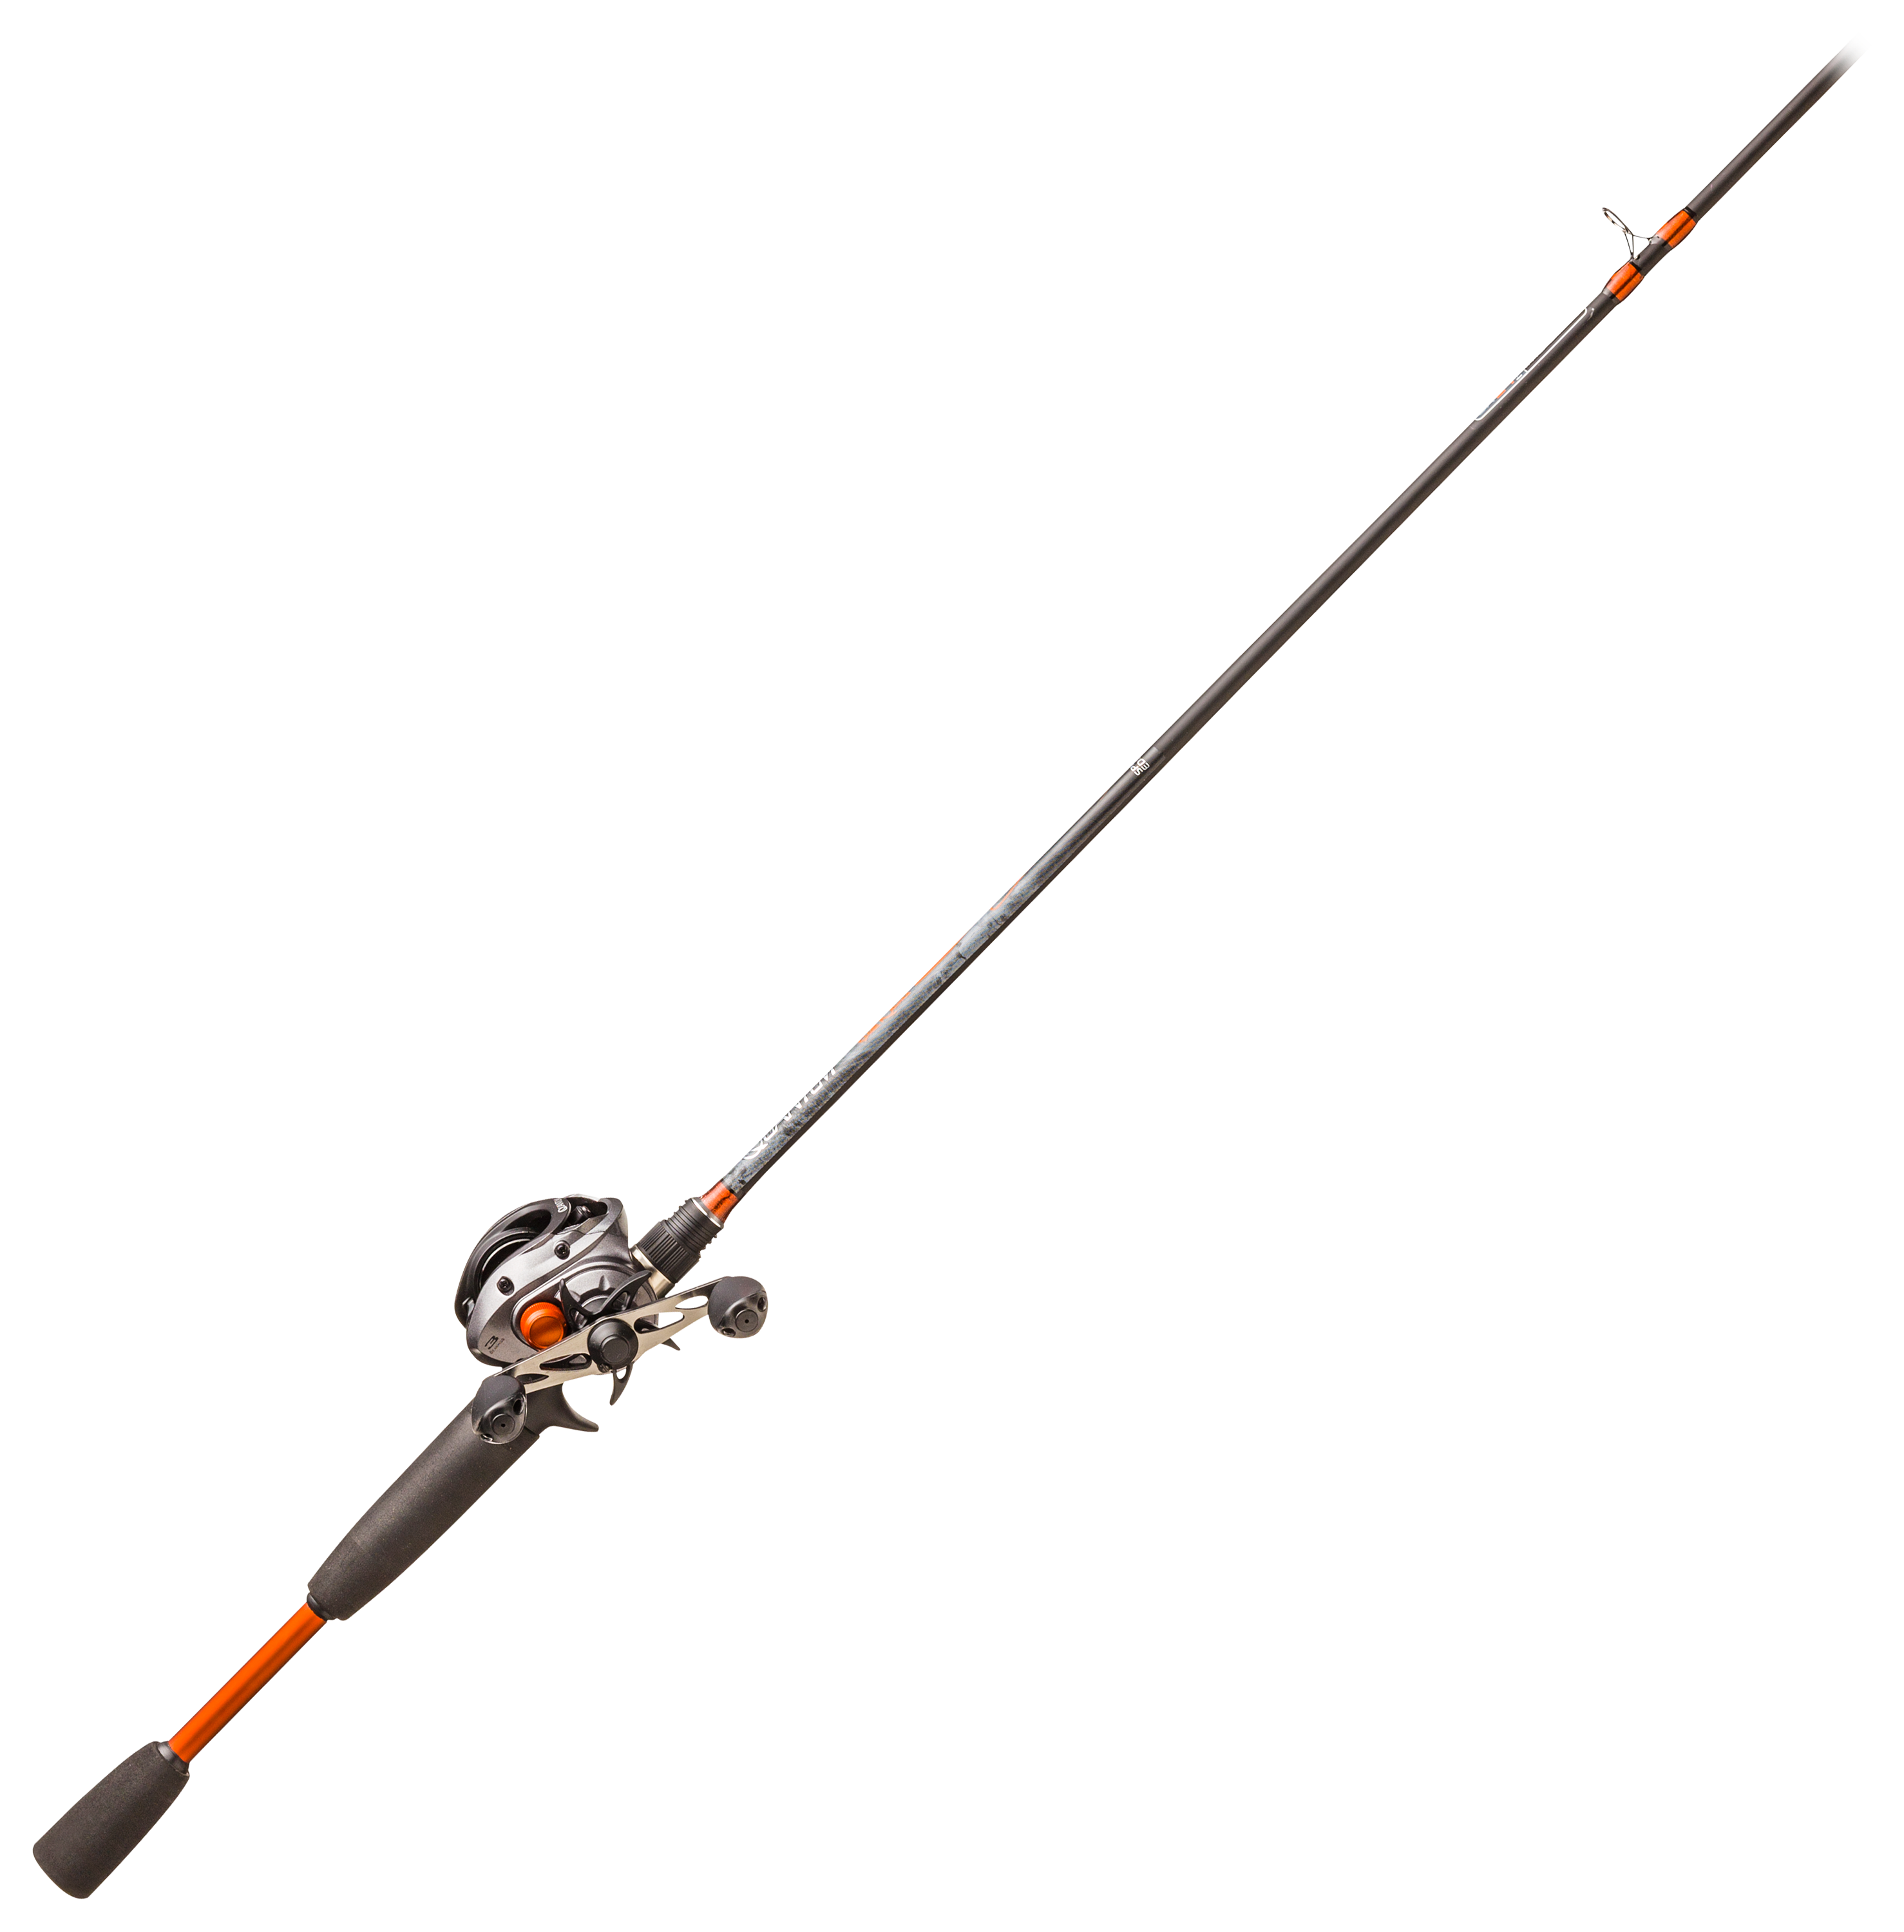 Bass Pro Shops Extreme Spinning Combo - 30 - 7' - 6:0:1 - Teal/Blue